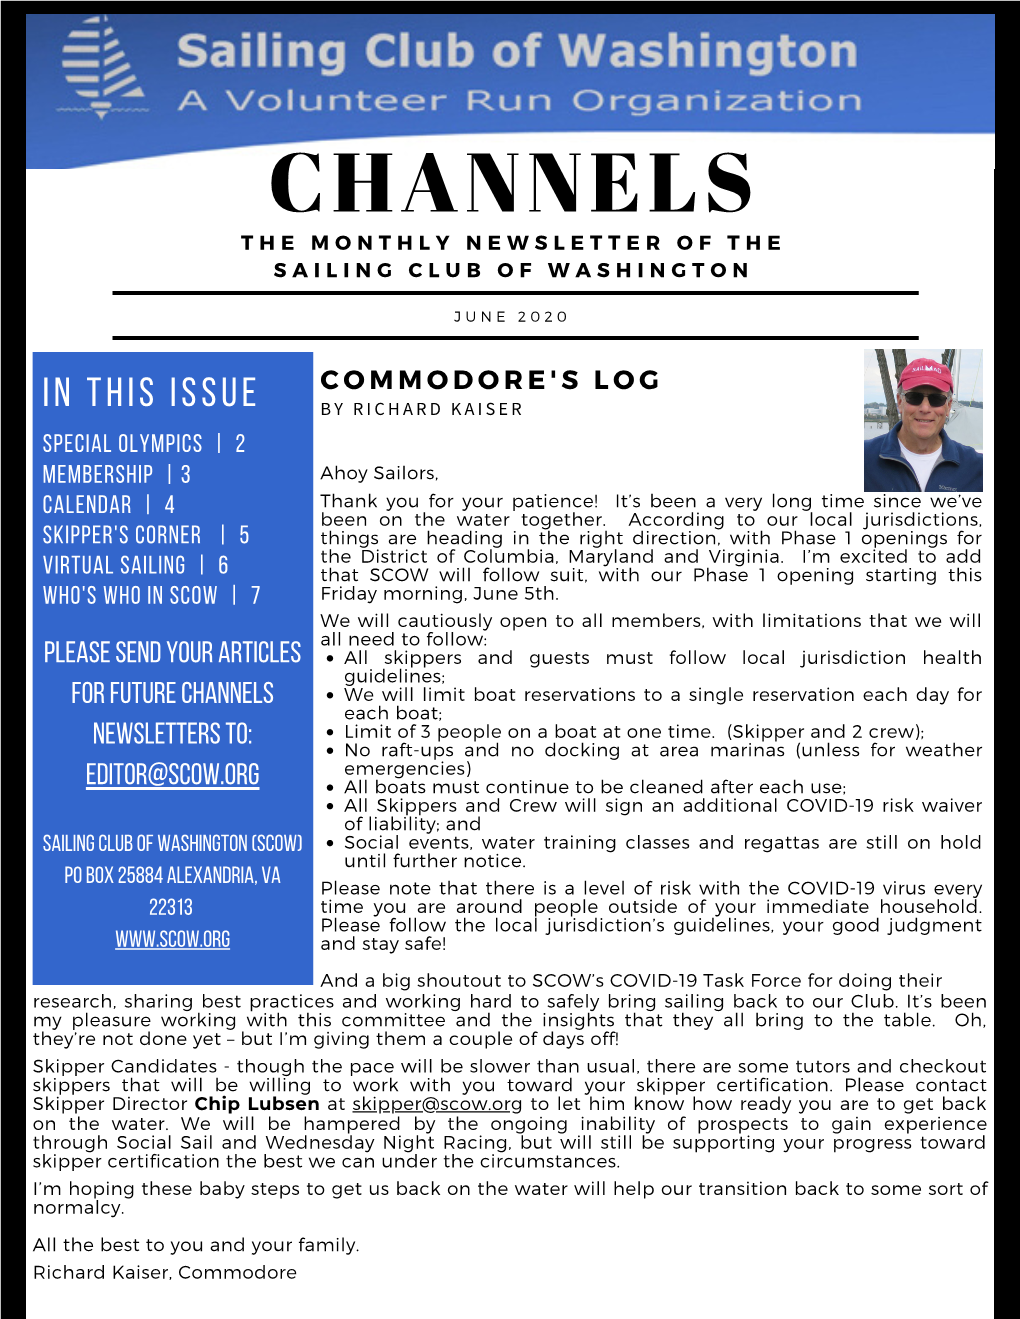 June 2020 Channels Issue Published